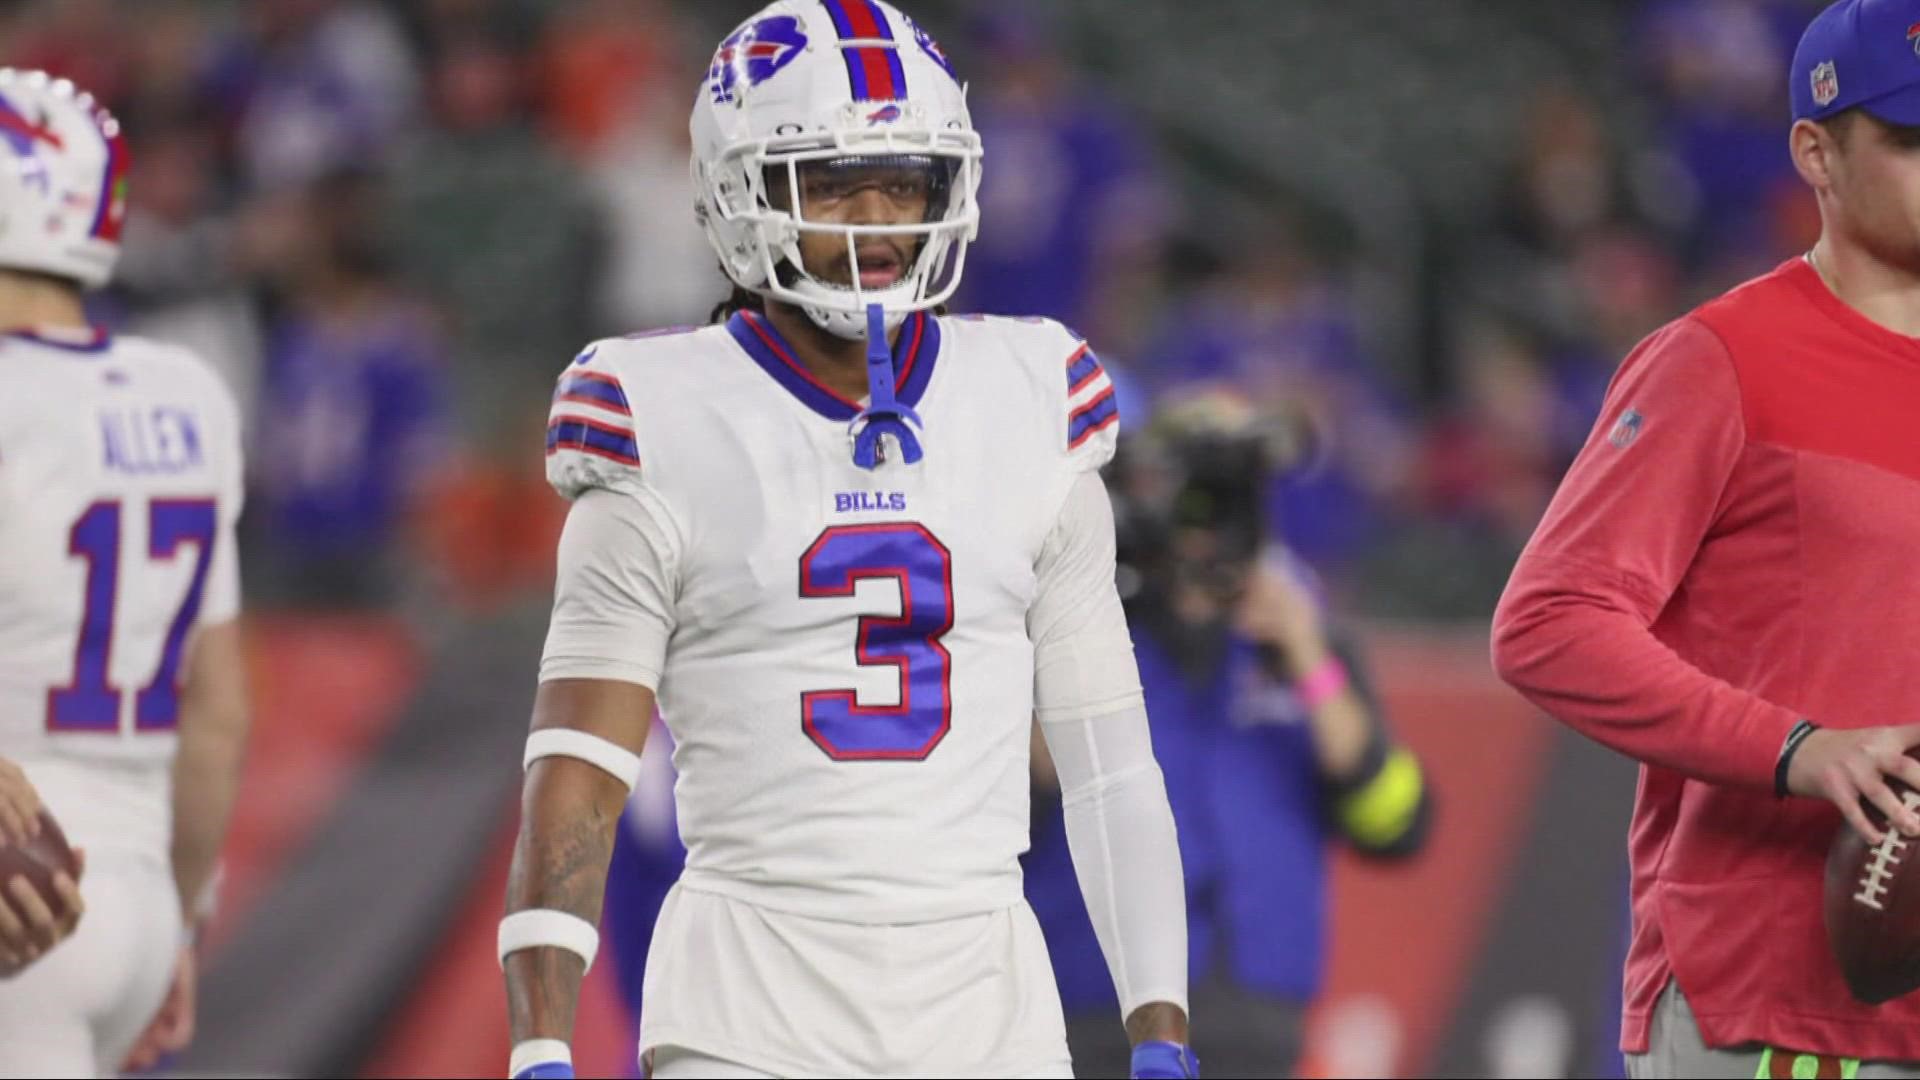 Buffalo Bills safety Damar Hamlin has been released from the hospital in Cincinnati and has been transferred to a hospital in Buffalo.